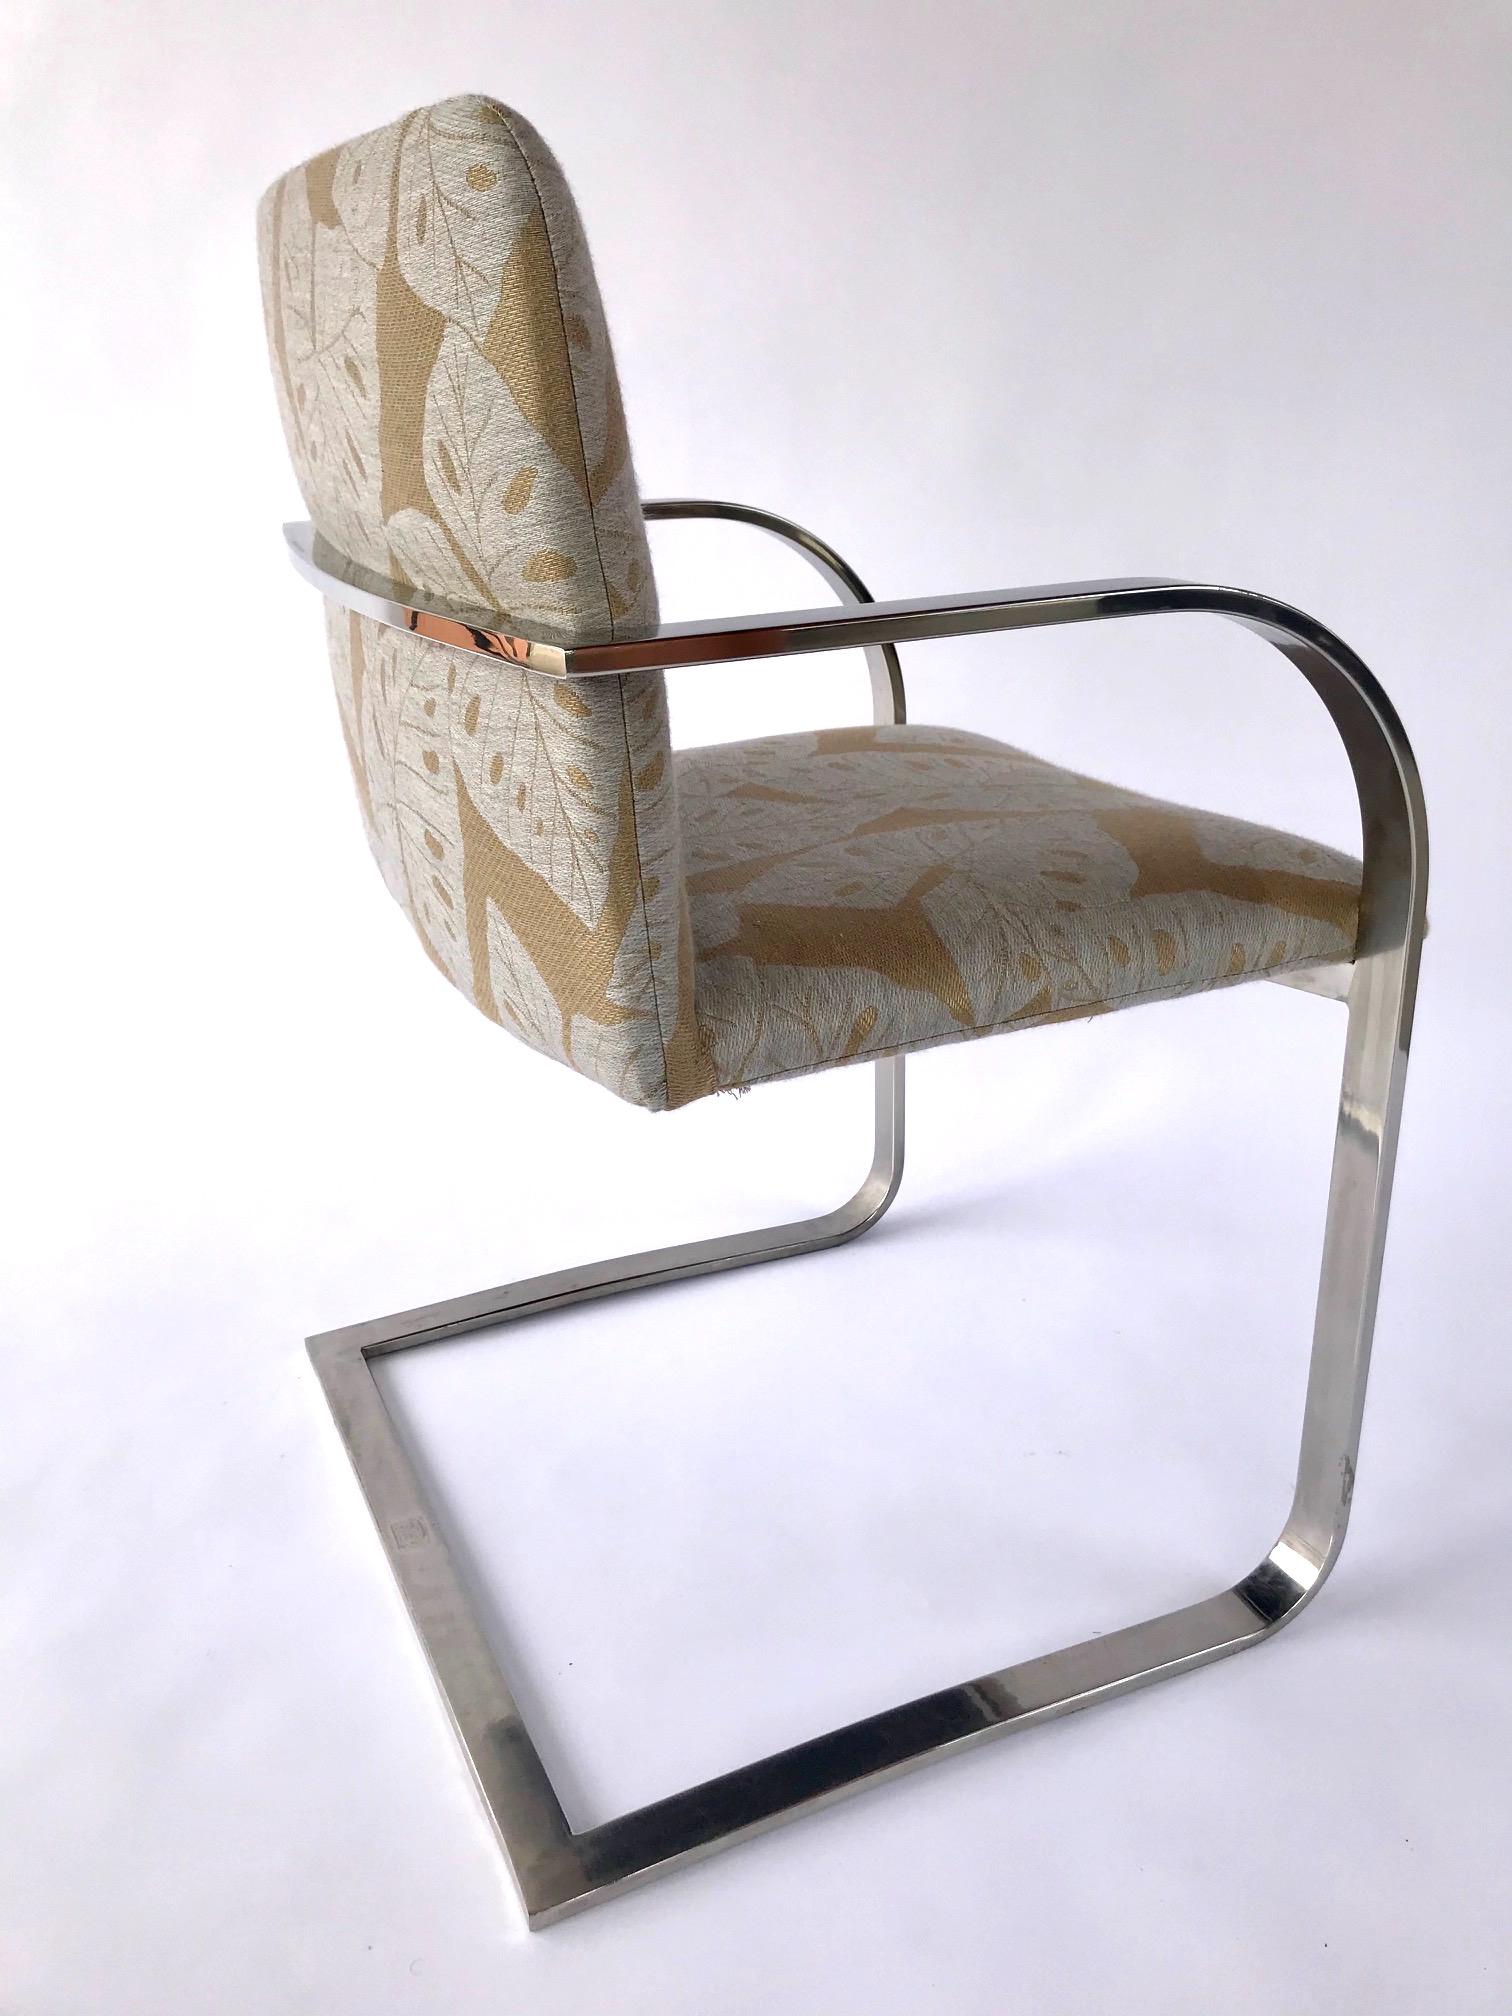 Polished Mid-Century Modern Chrome Desk Chair with Tropical Print by Brueton